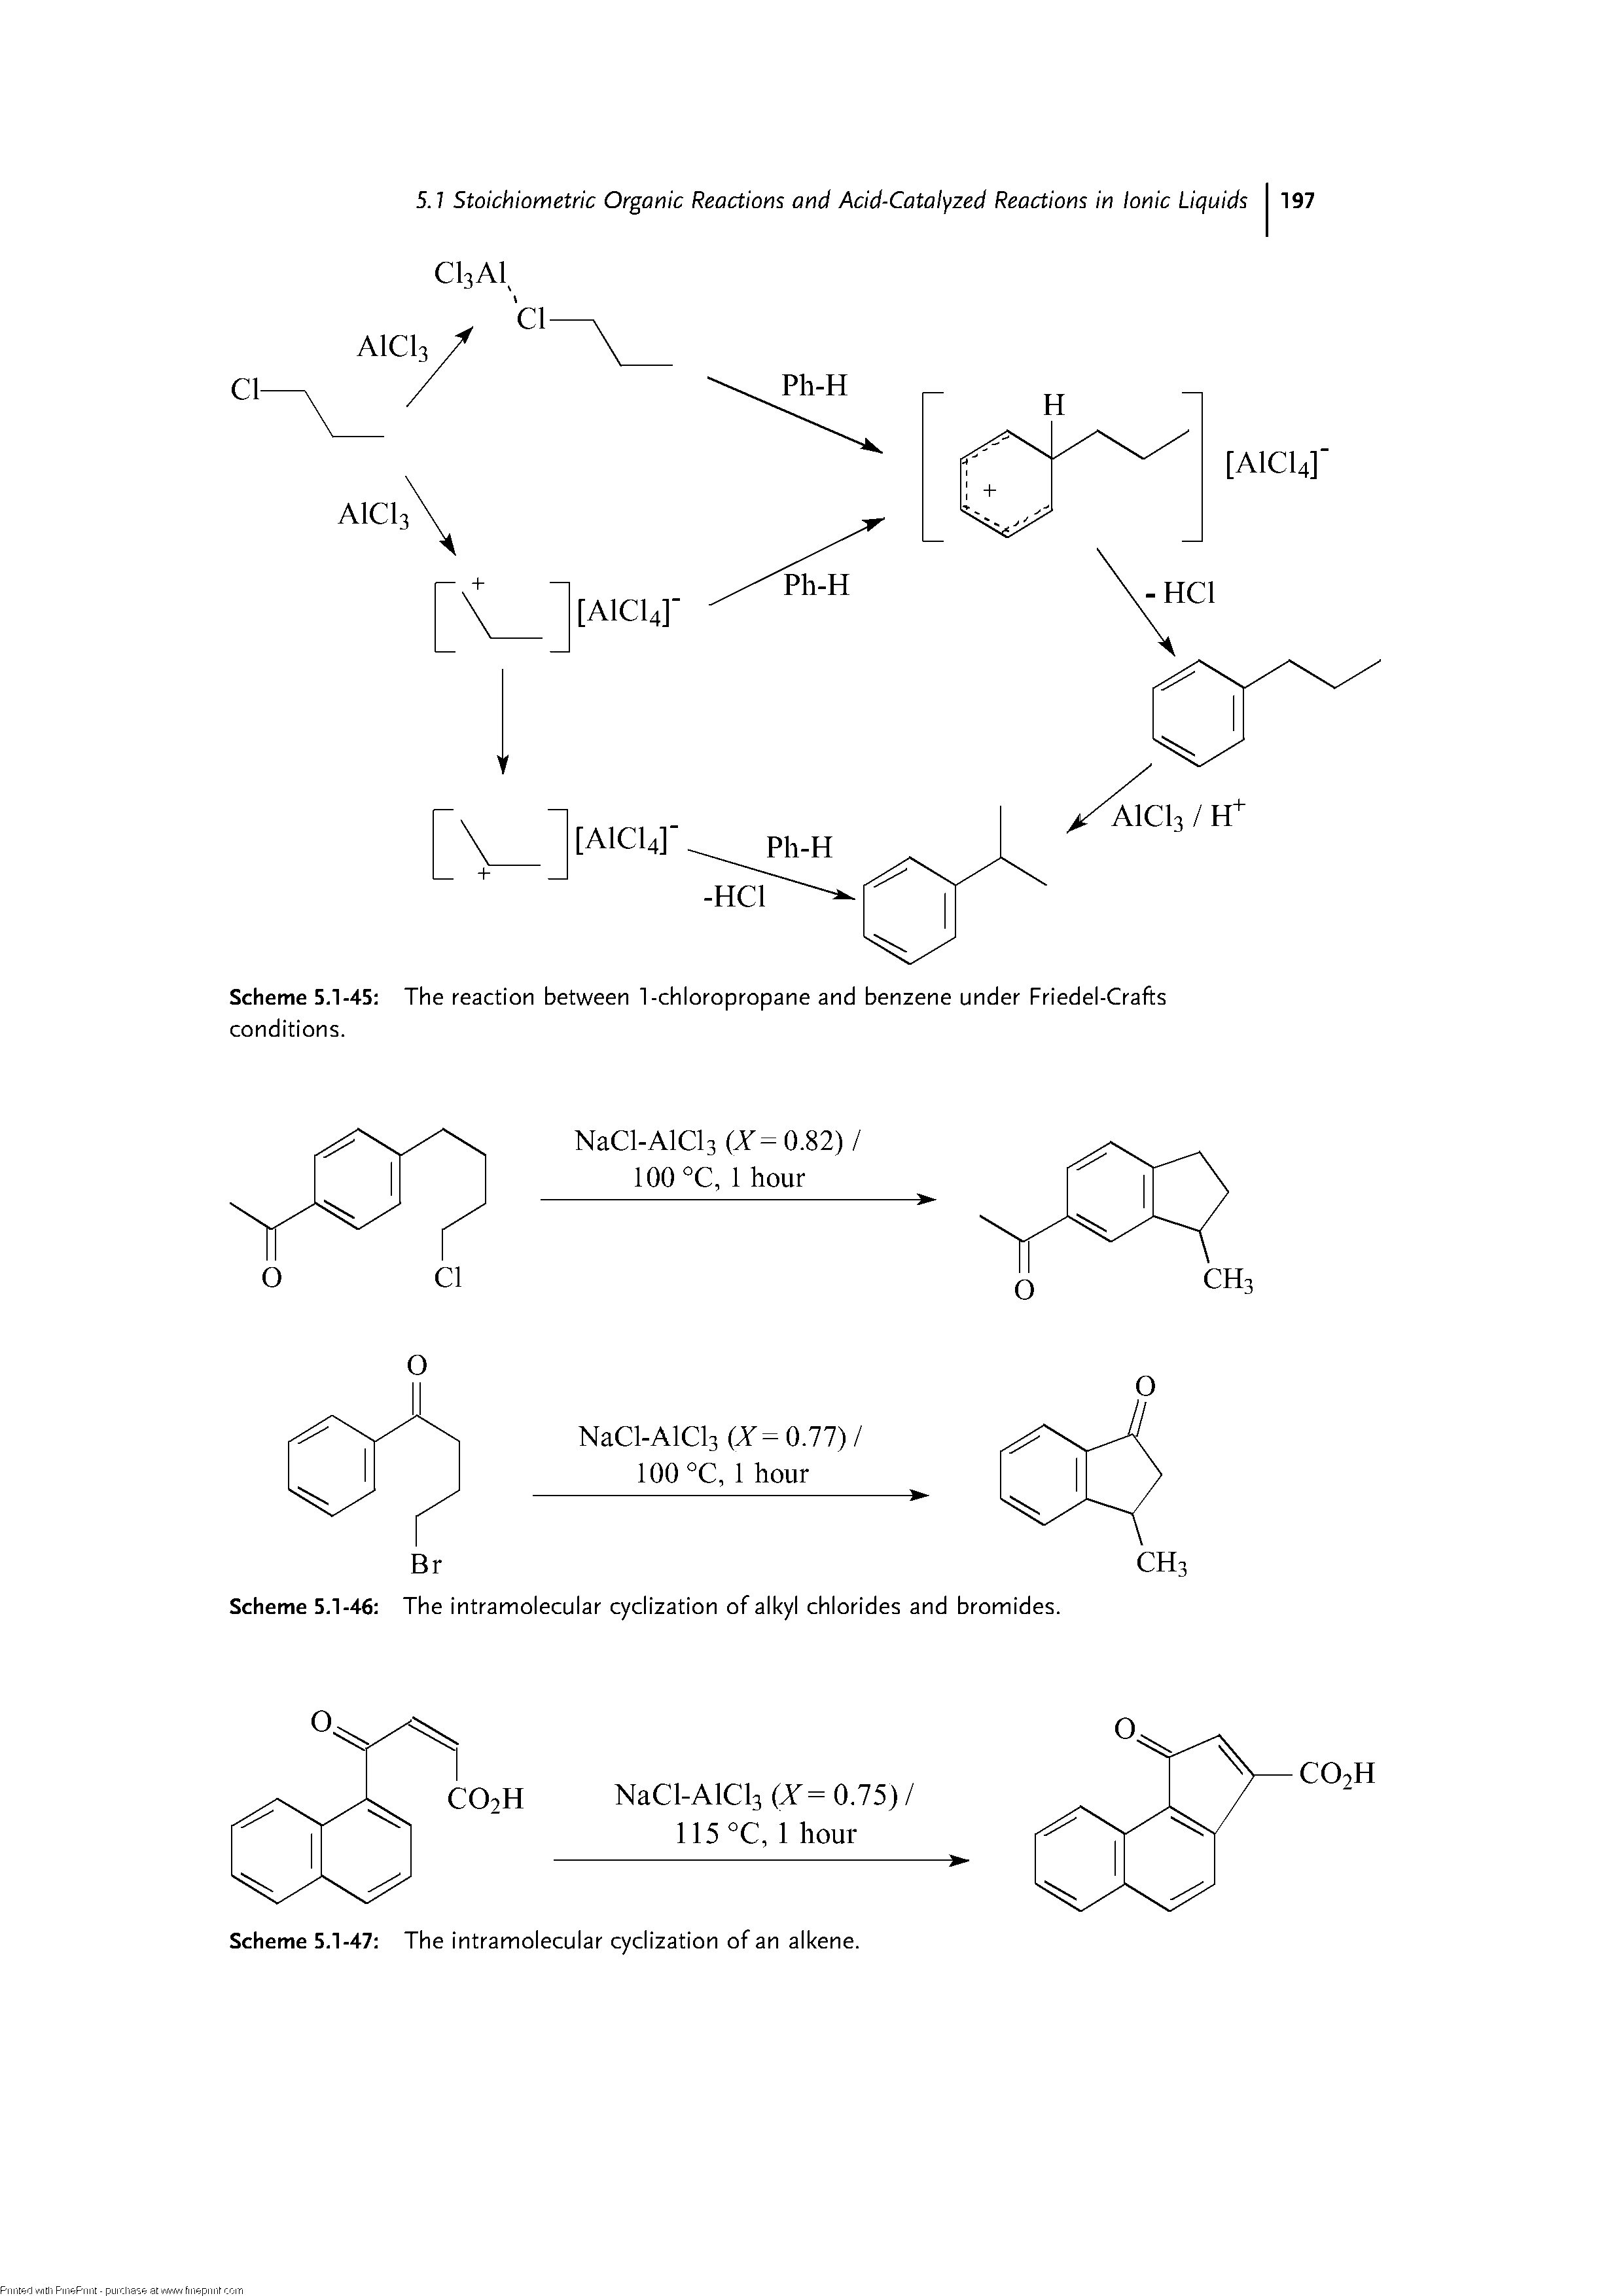 Scheme 5.1-46 The intramolecular cyclization of alkyl chlorides and bromides.